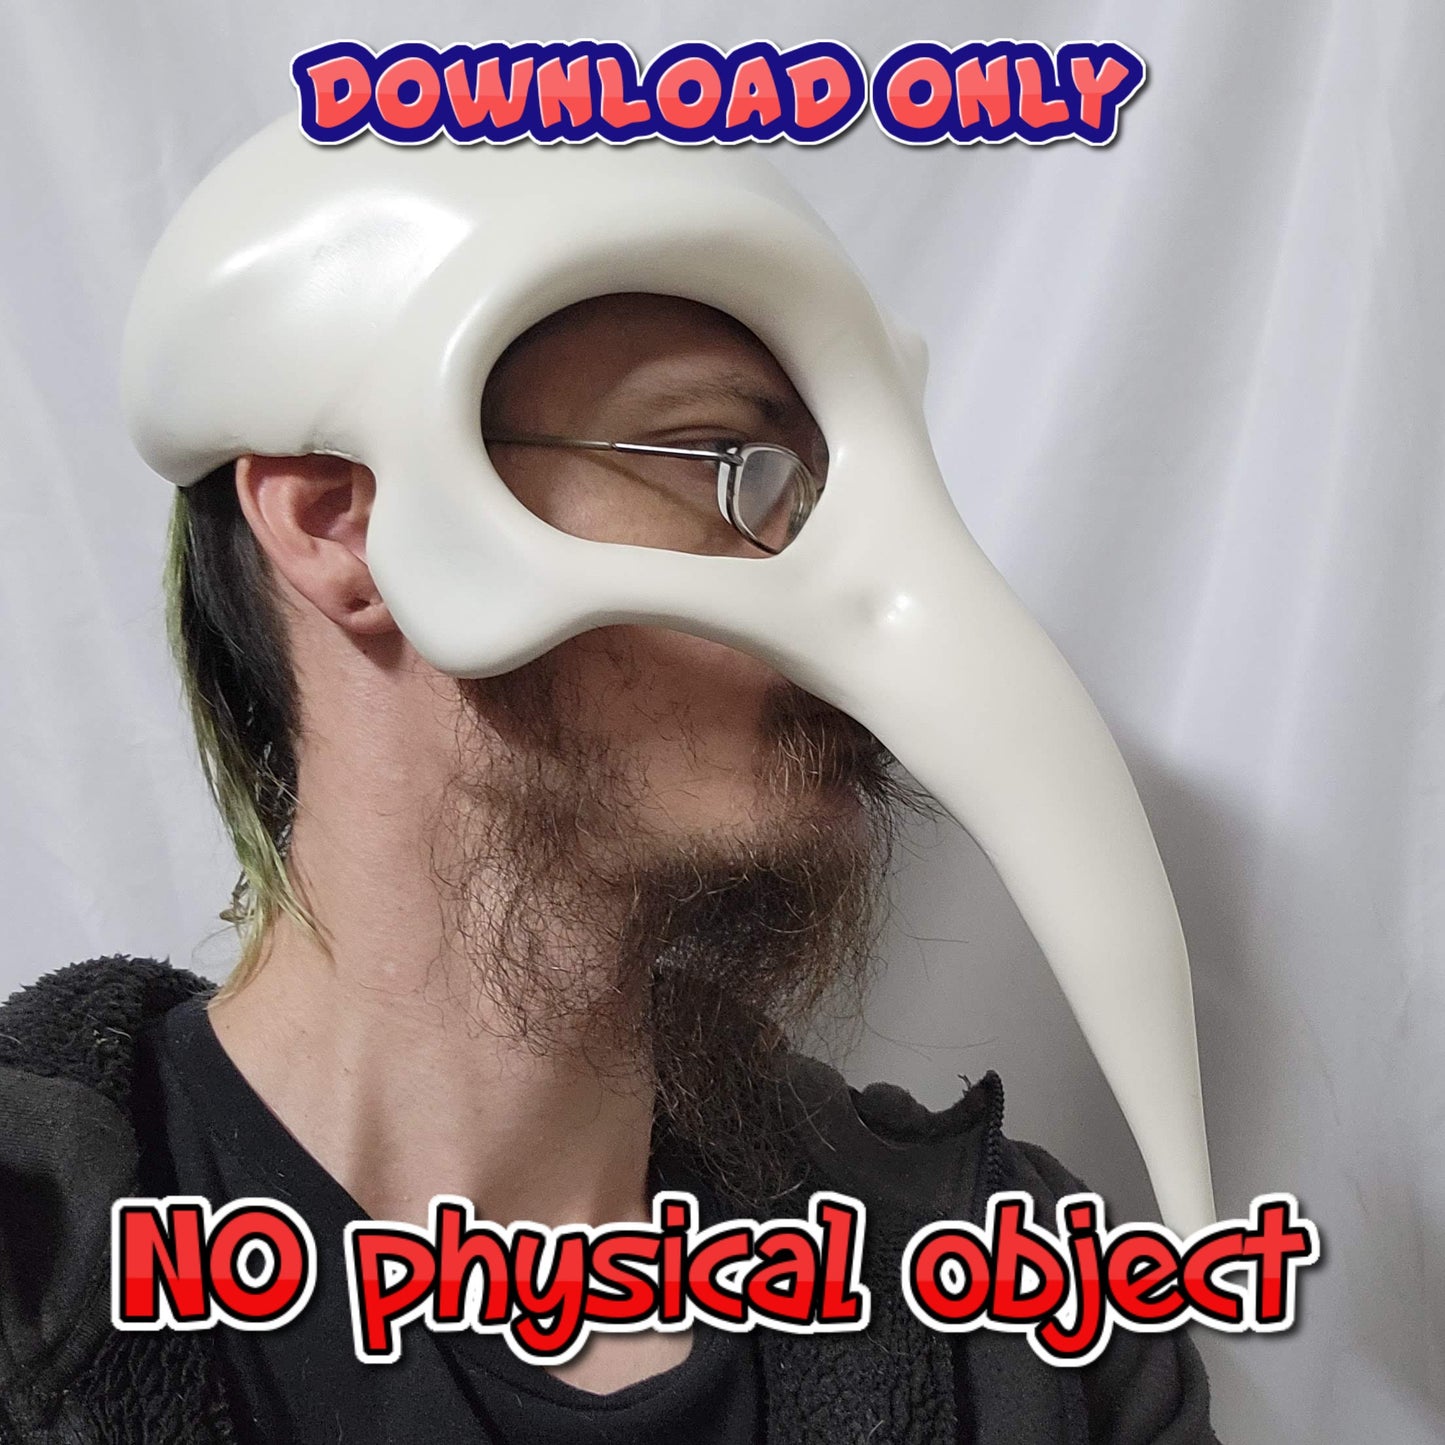 3D Print file for Crow Skull Helmet (as seen on tik tok) Lord and Lady Towers